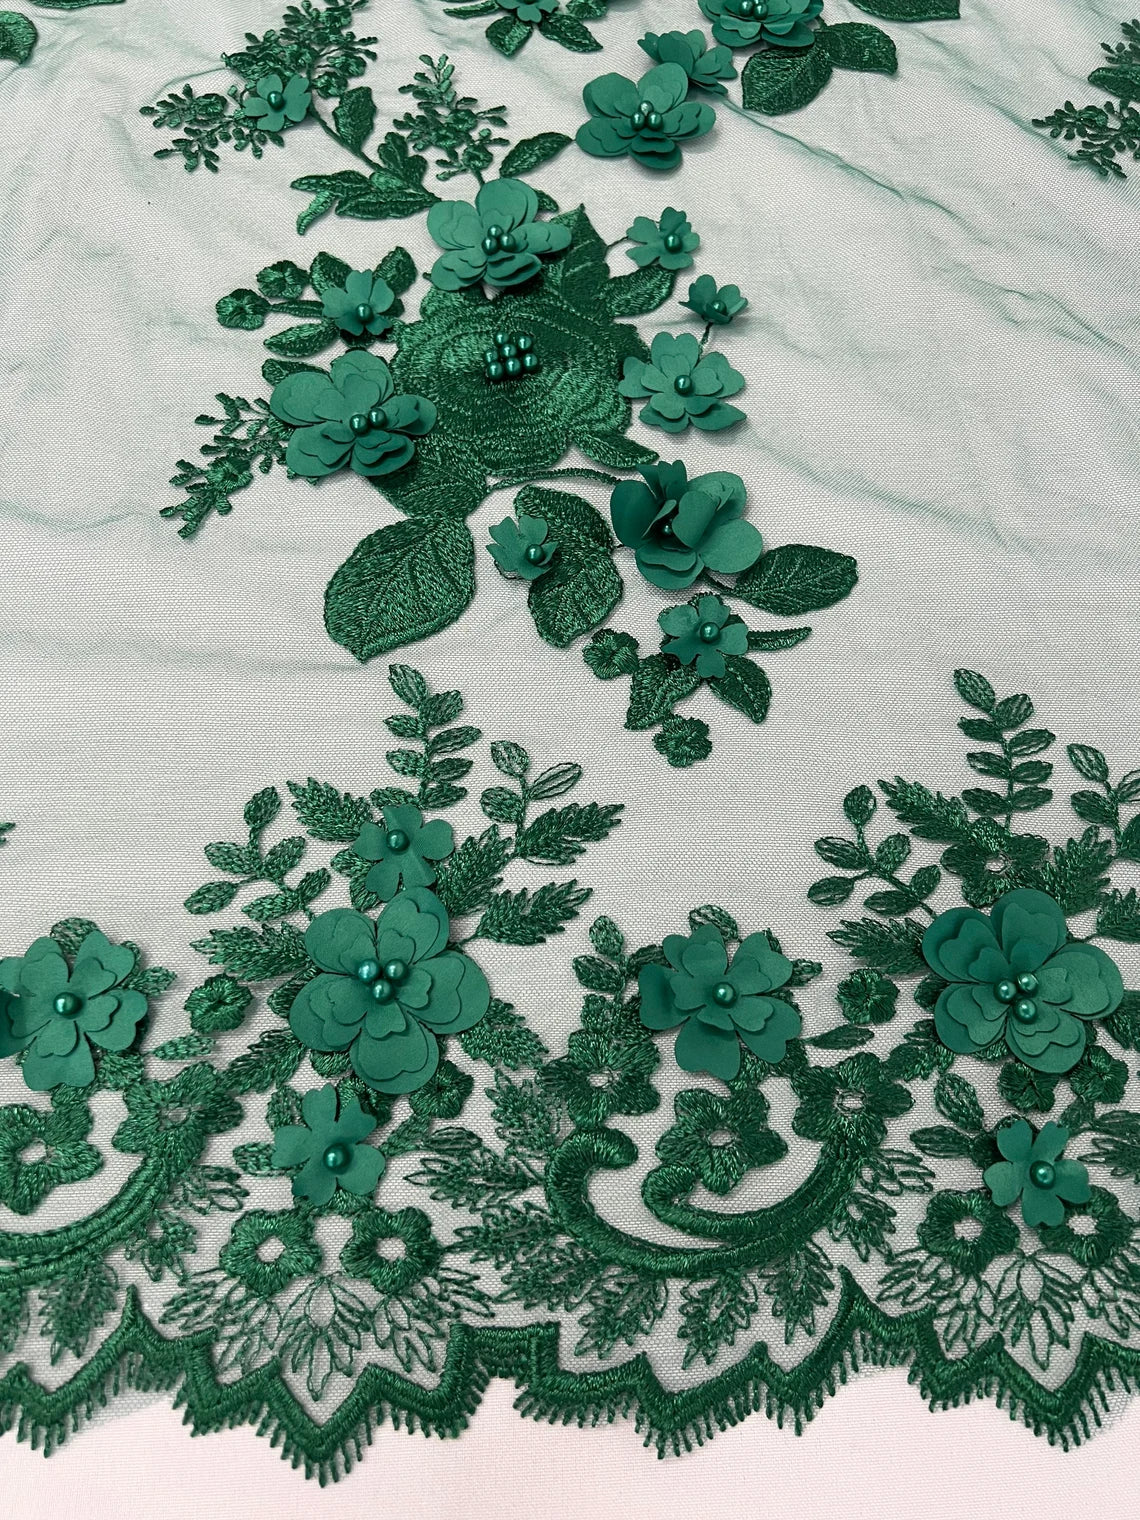 3D Flower Panels Fabric - Hunter Green - Flower Panels Bead Embroidered on Lace Fabric Sold By Yard